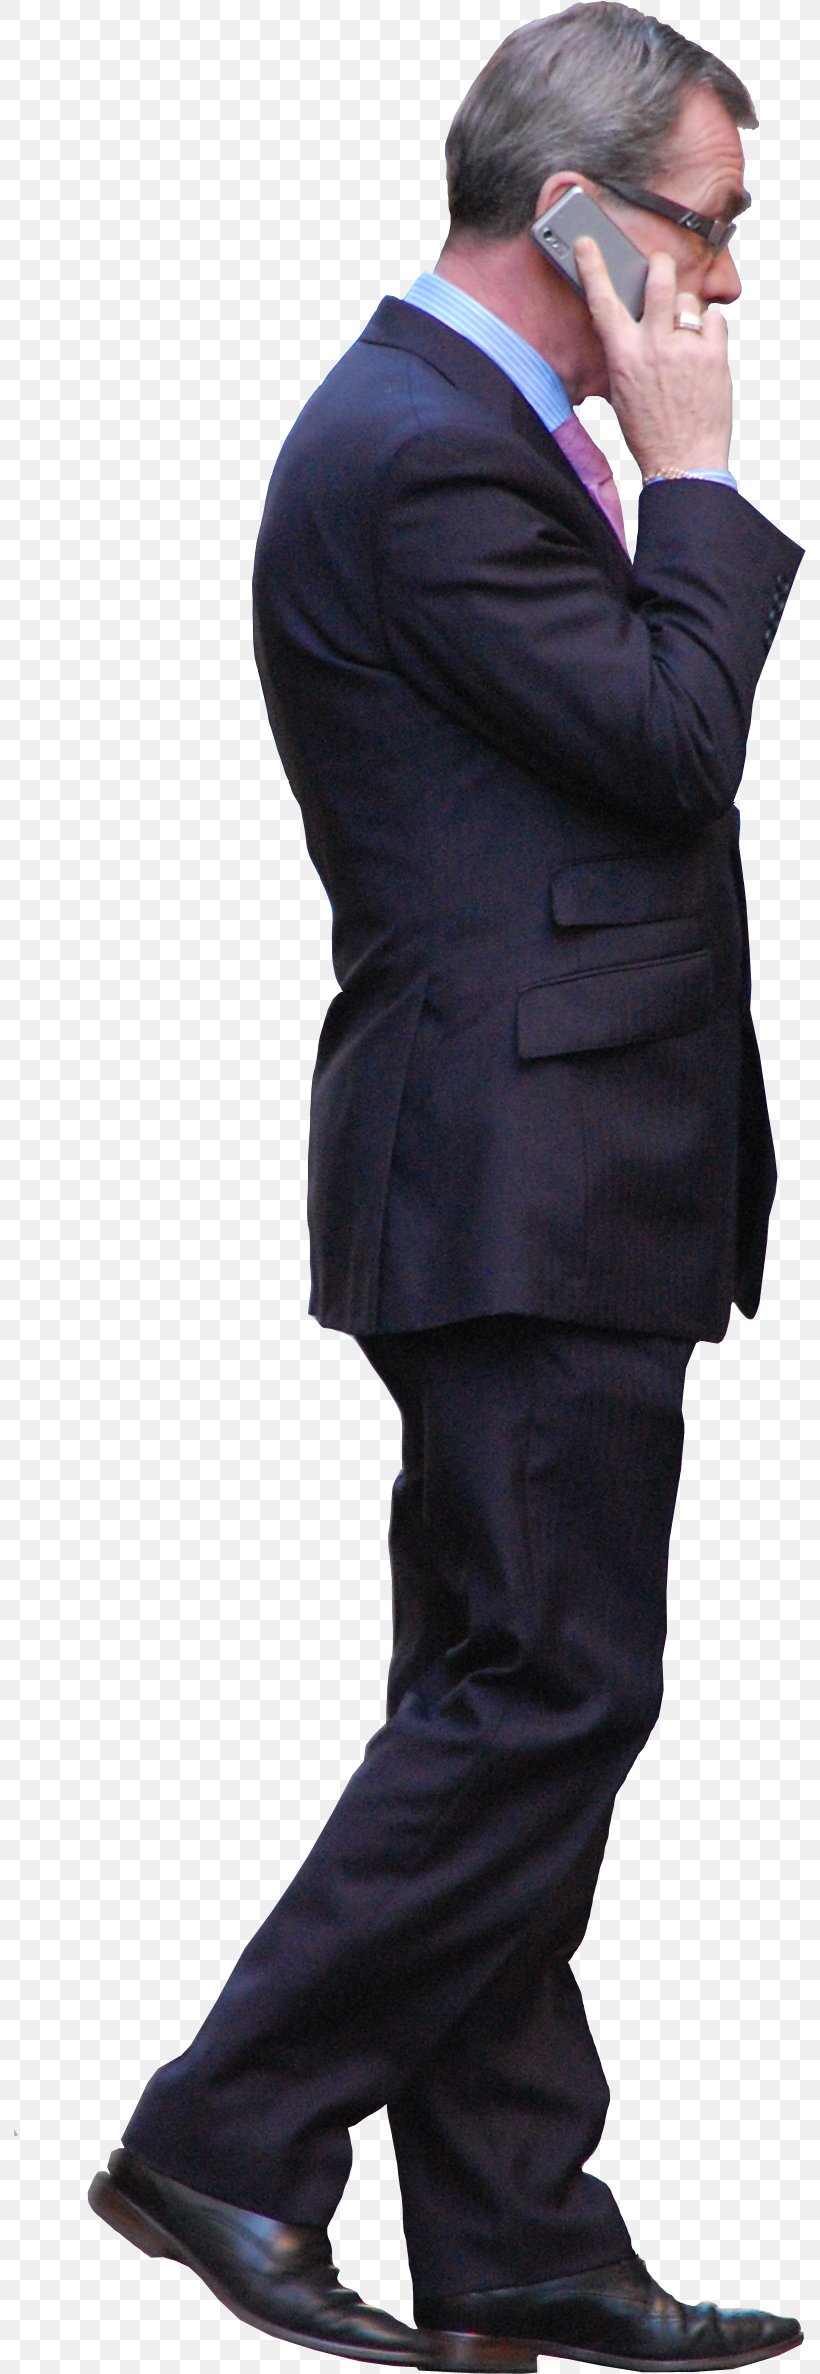 Businessperson IPhone Telephone, PNG, 792x2374px, Businessperson, Apple, Business, Company, Formal Wear Download Free